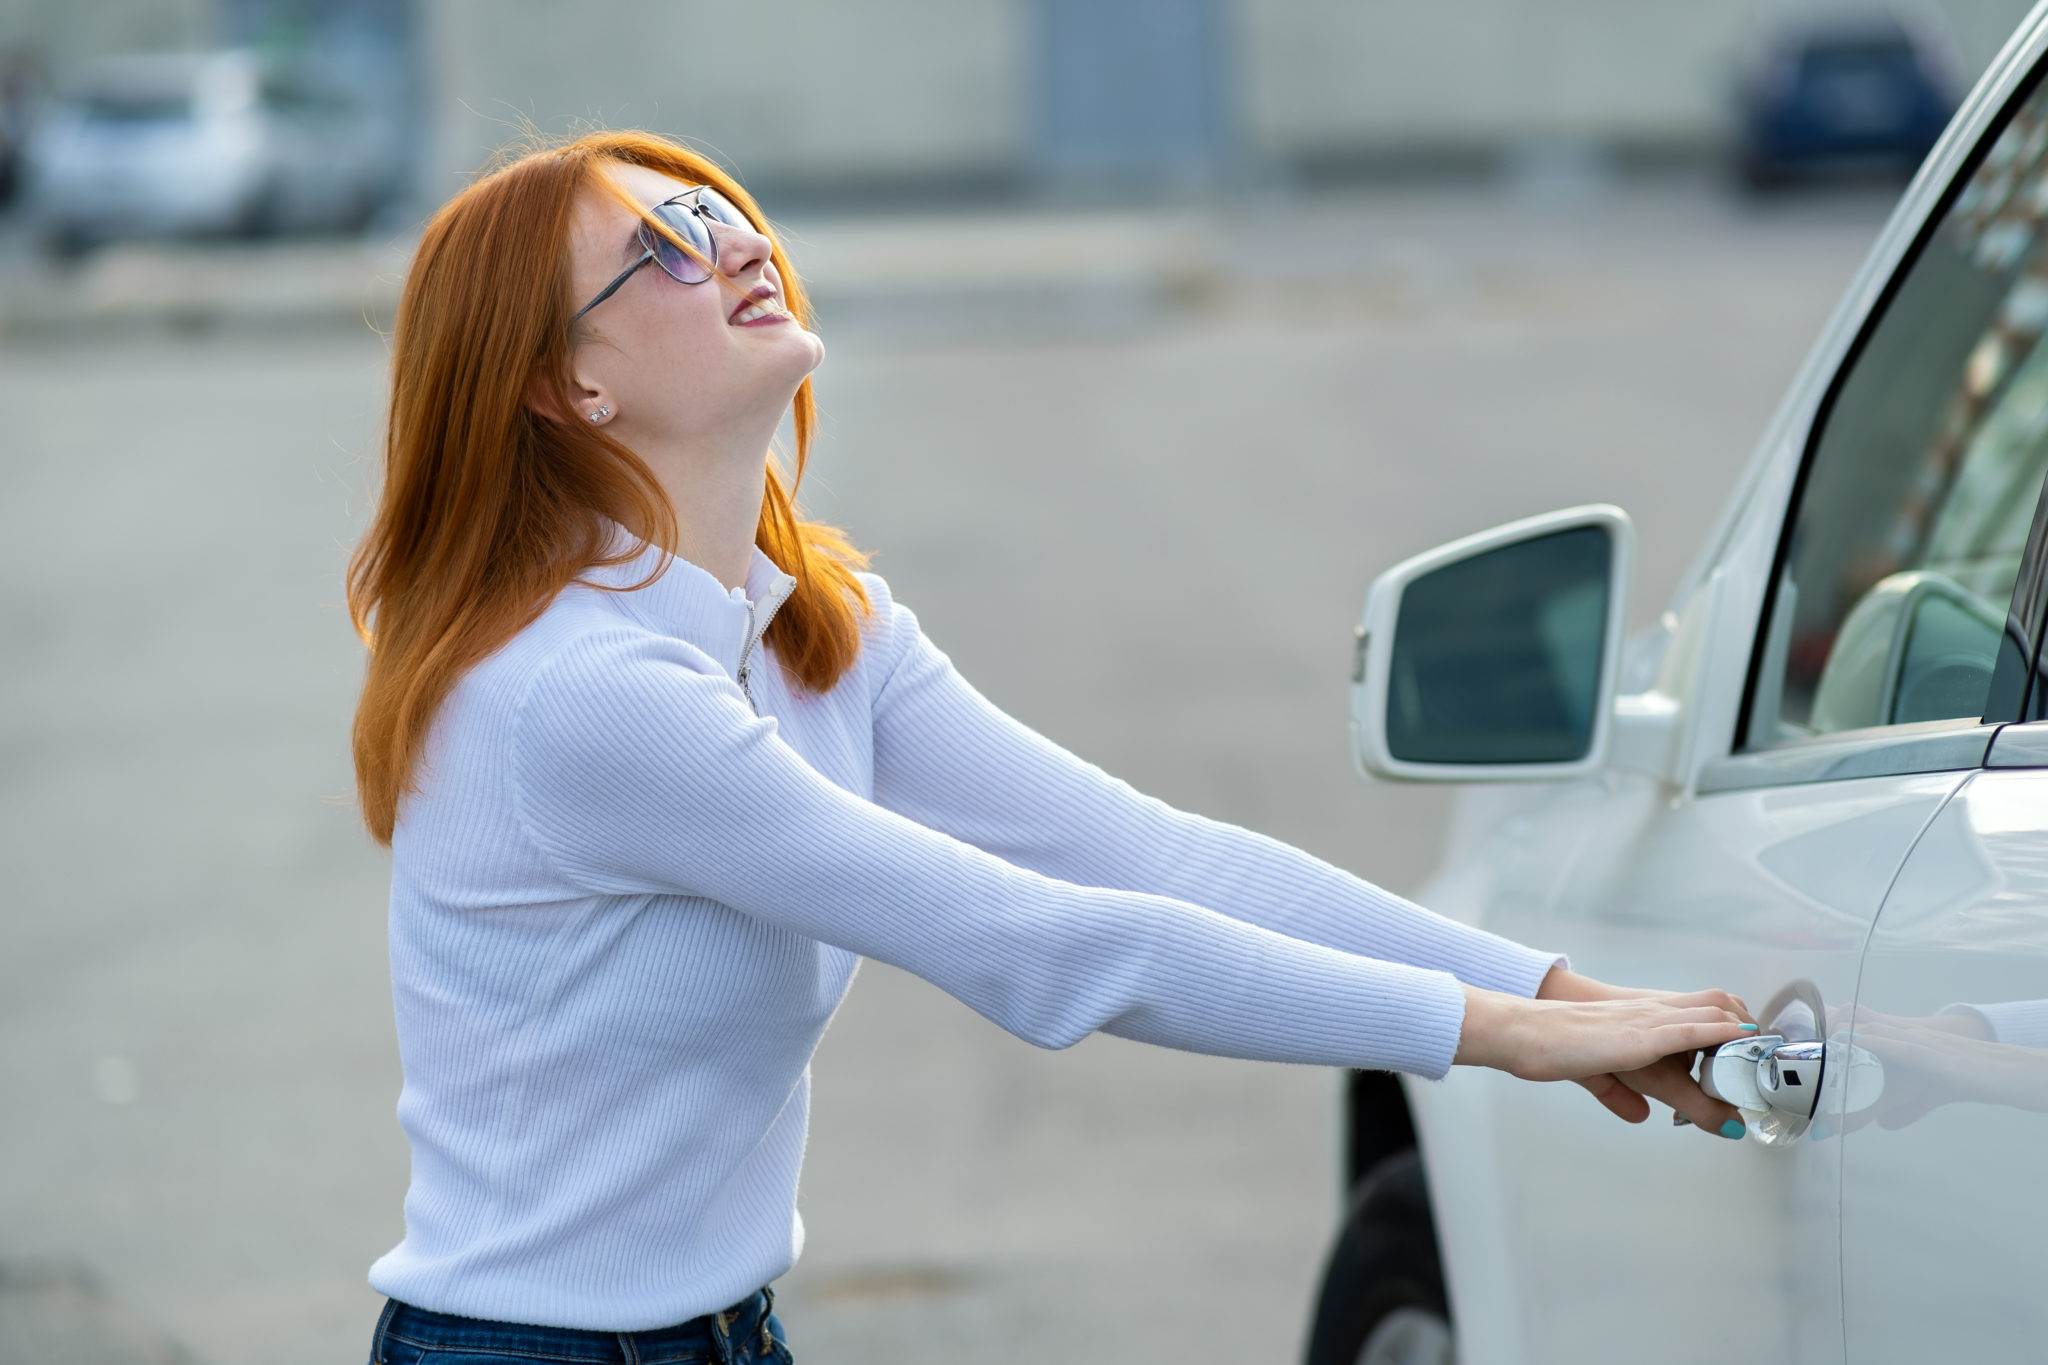 https://autolab.com.co/wp-content/uploads/2023/08/a-woman-trying-to-open-closed-car-doors-2022-01-24-22-45-08-utc-scaled.jpg